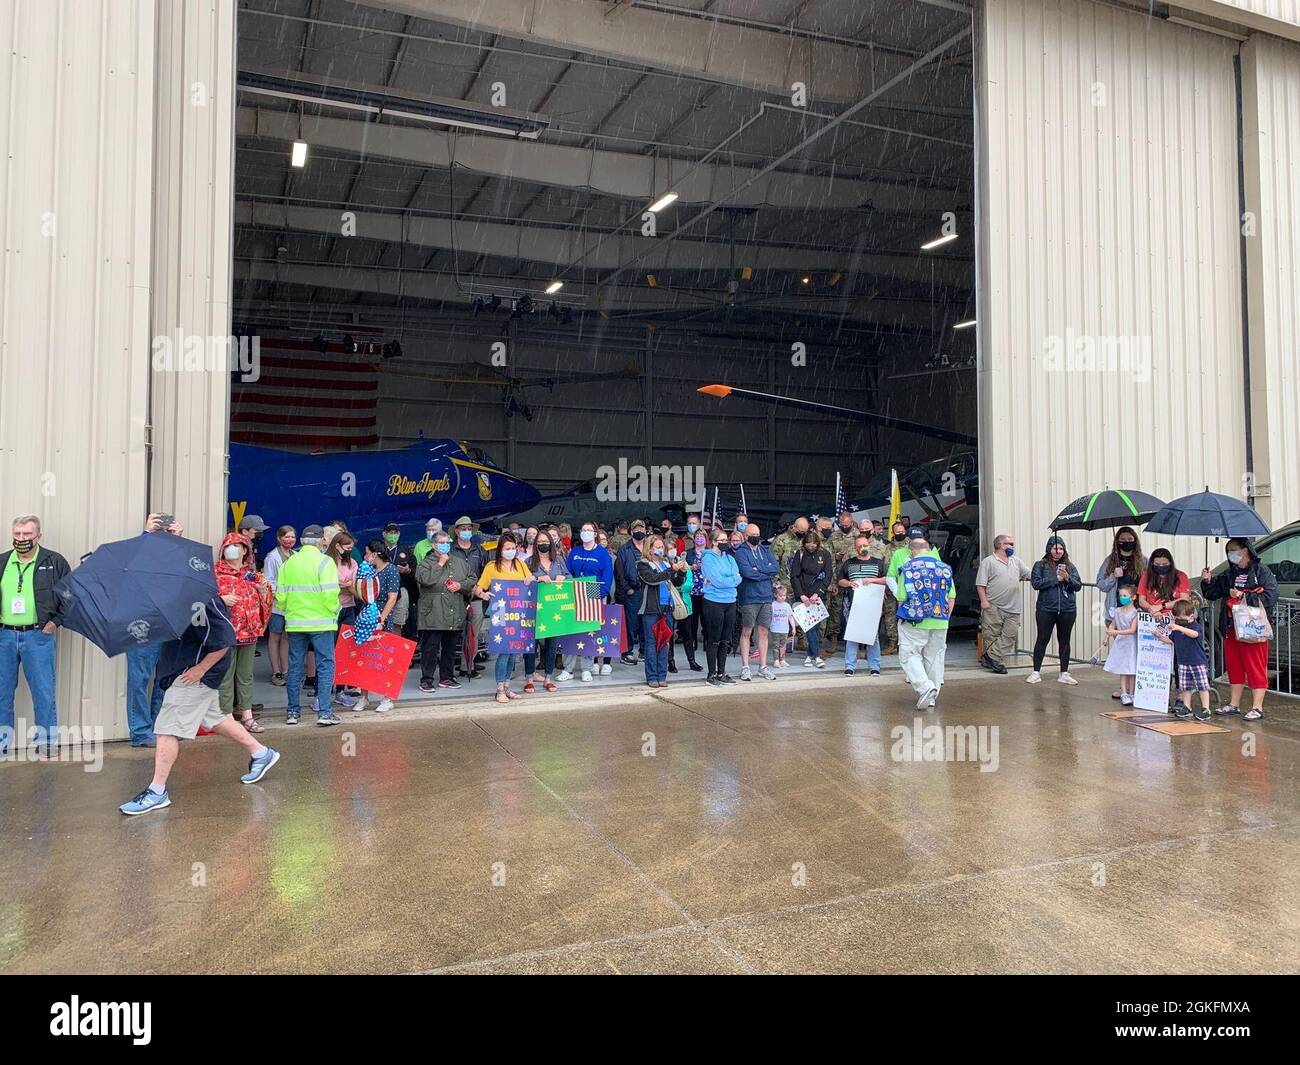 The Kentucky National Guard welcomed home the 1163rd Medical Company Area Support from a year-long deployment to Poland Apr. 10, 2021. The 1163rd flew into Bluegrass Airport in Lexington, Ky. where they were greeting by friends, family and Kentucky Guard leadership. Stock Photo